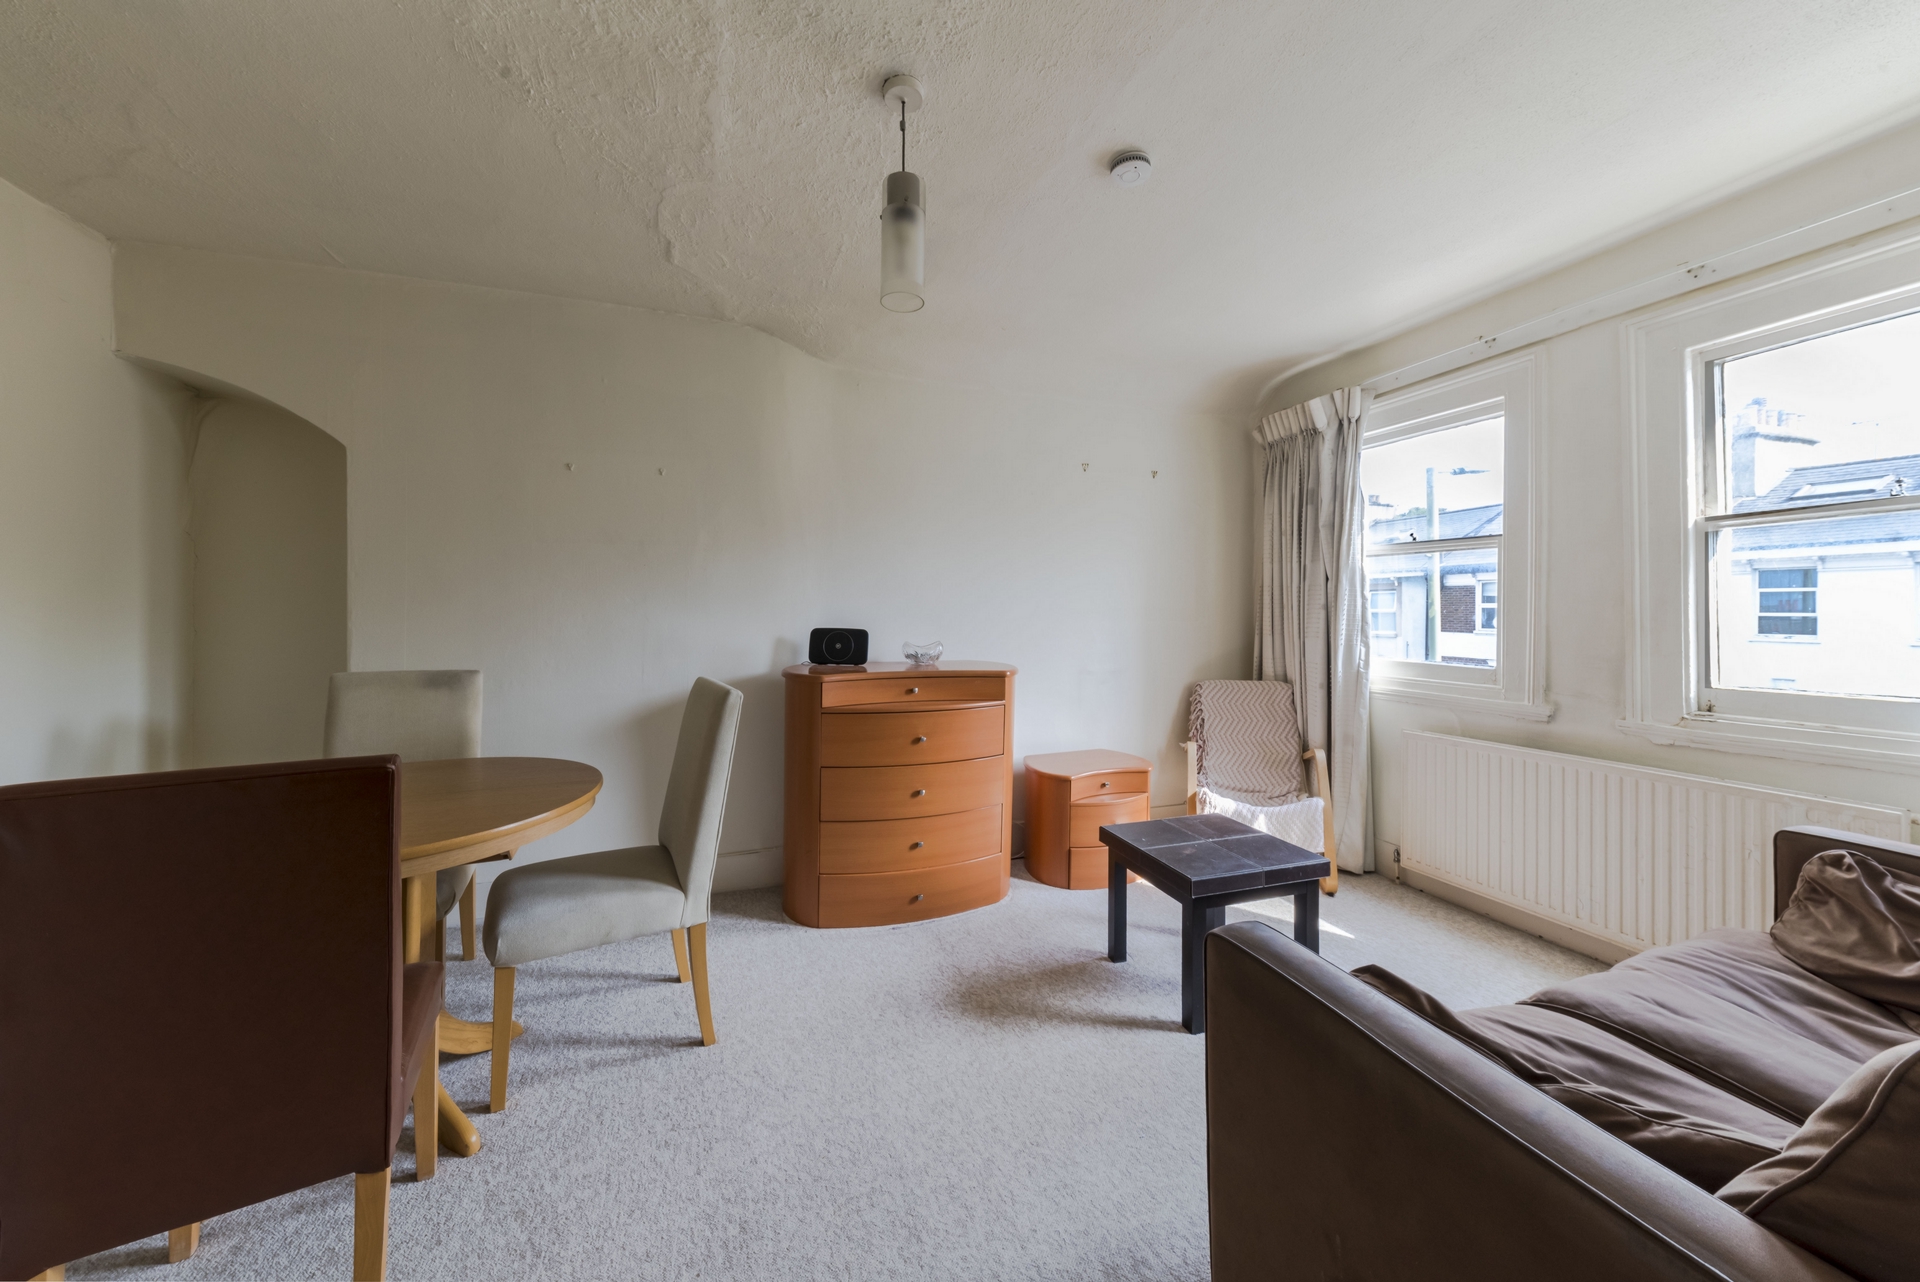 Similar Property: Flat in Childs Hill